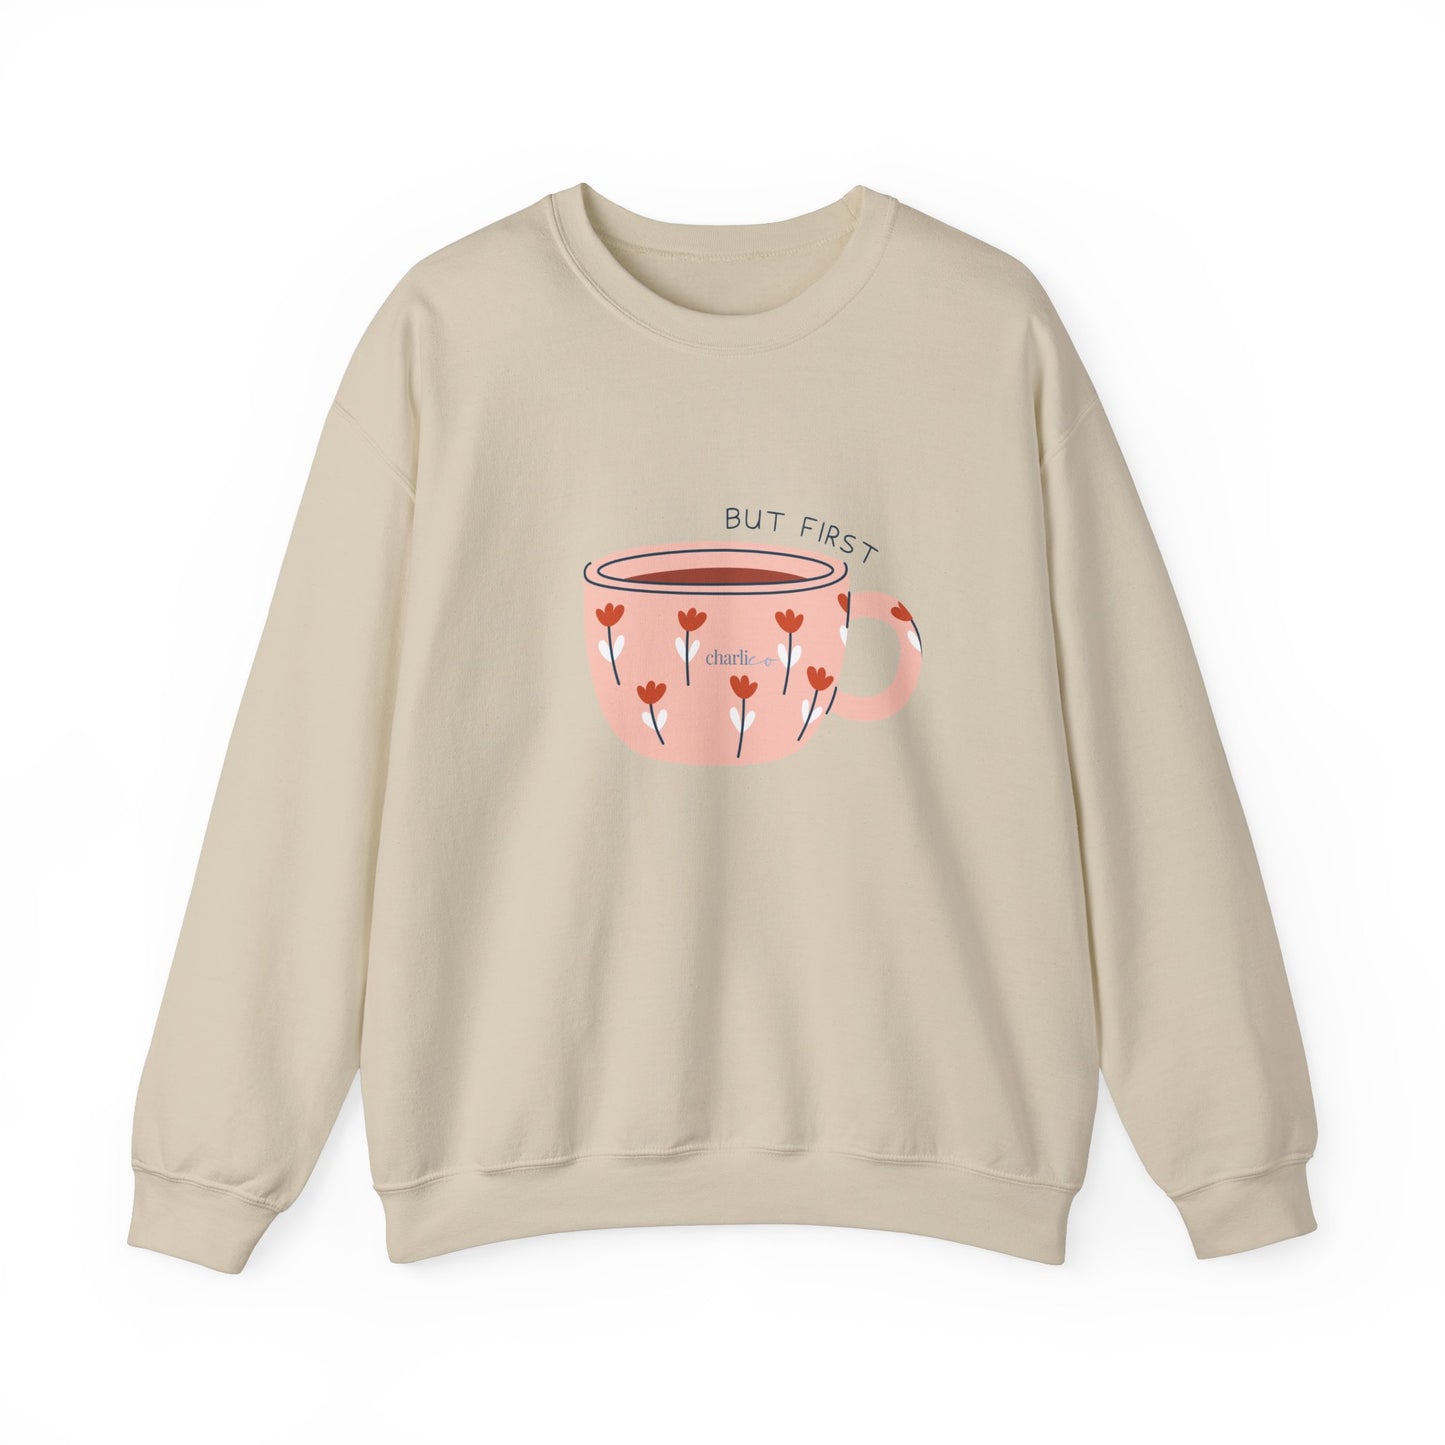 Crewneck sweatshirt -BUT FIRST- for adults